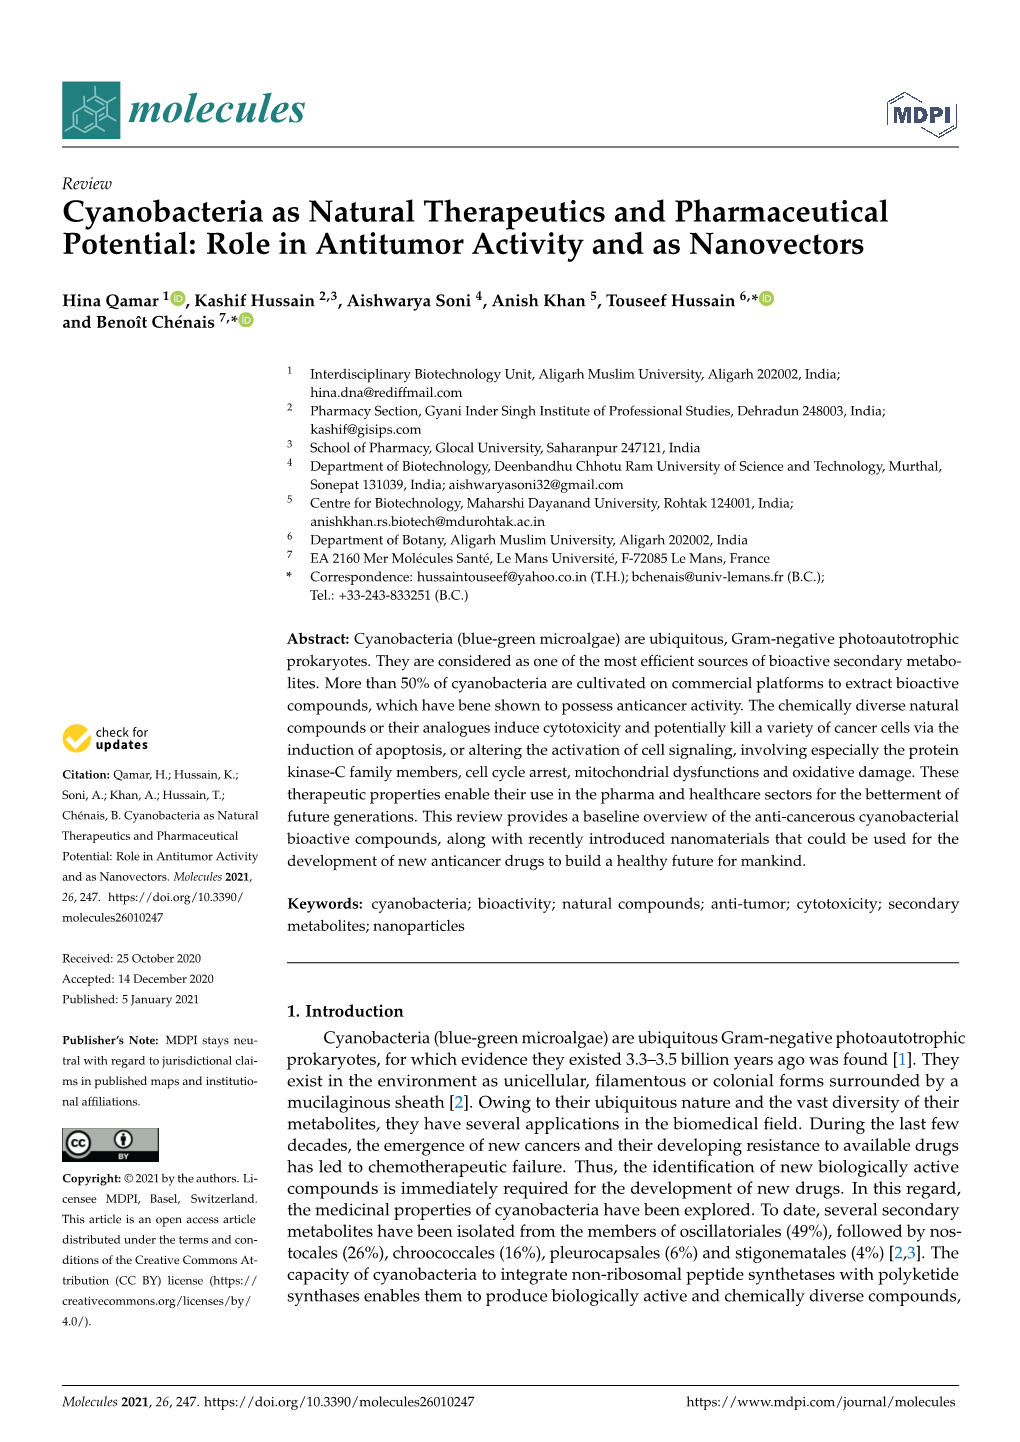 Cyanobacteria As Natural Therapeutics and Pharmaceutical Potential: Role in Antitumor Activity and As Nanovectors